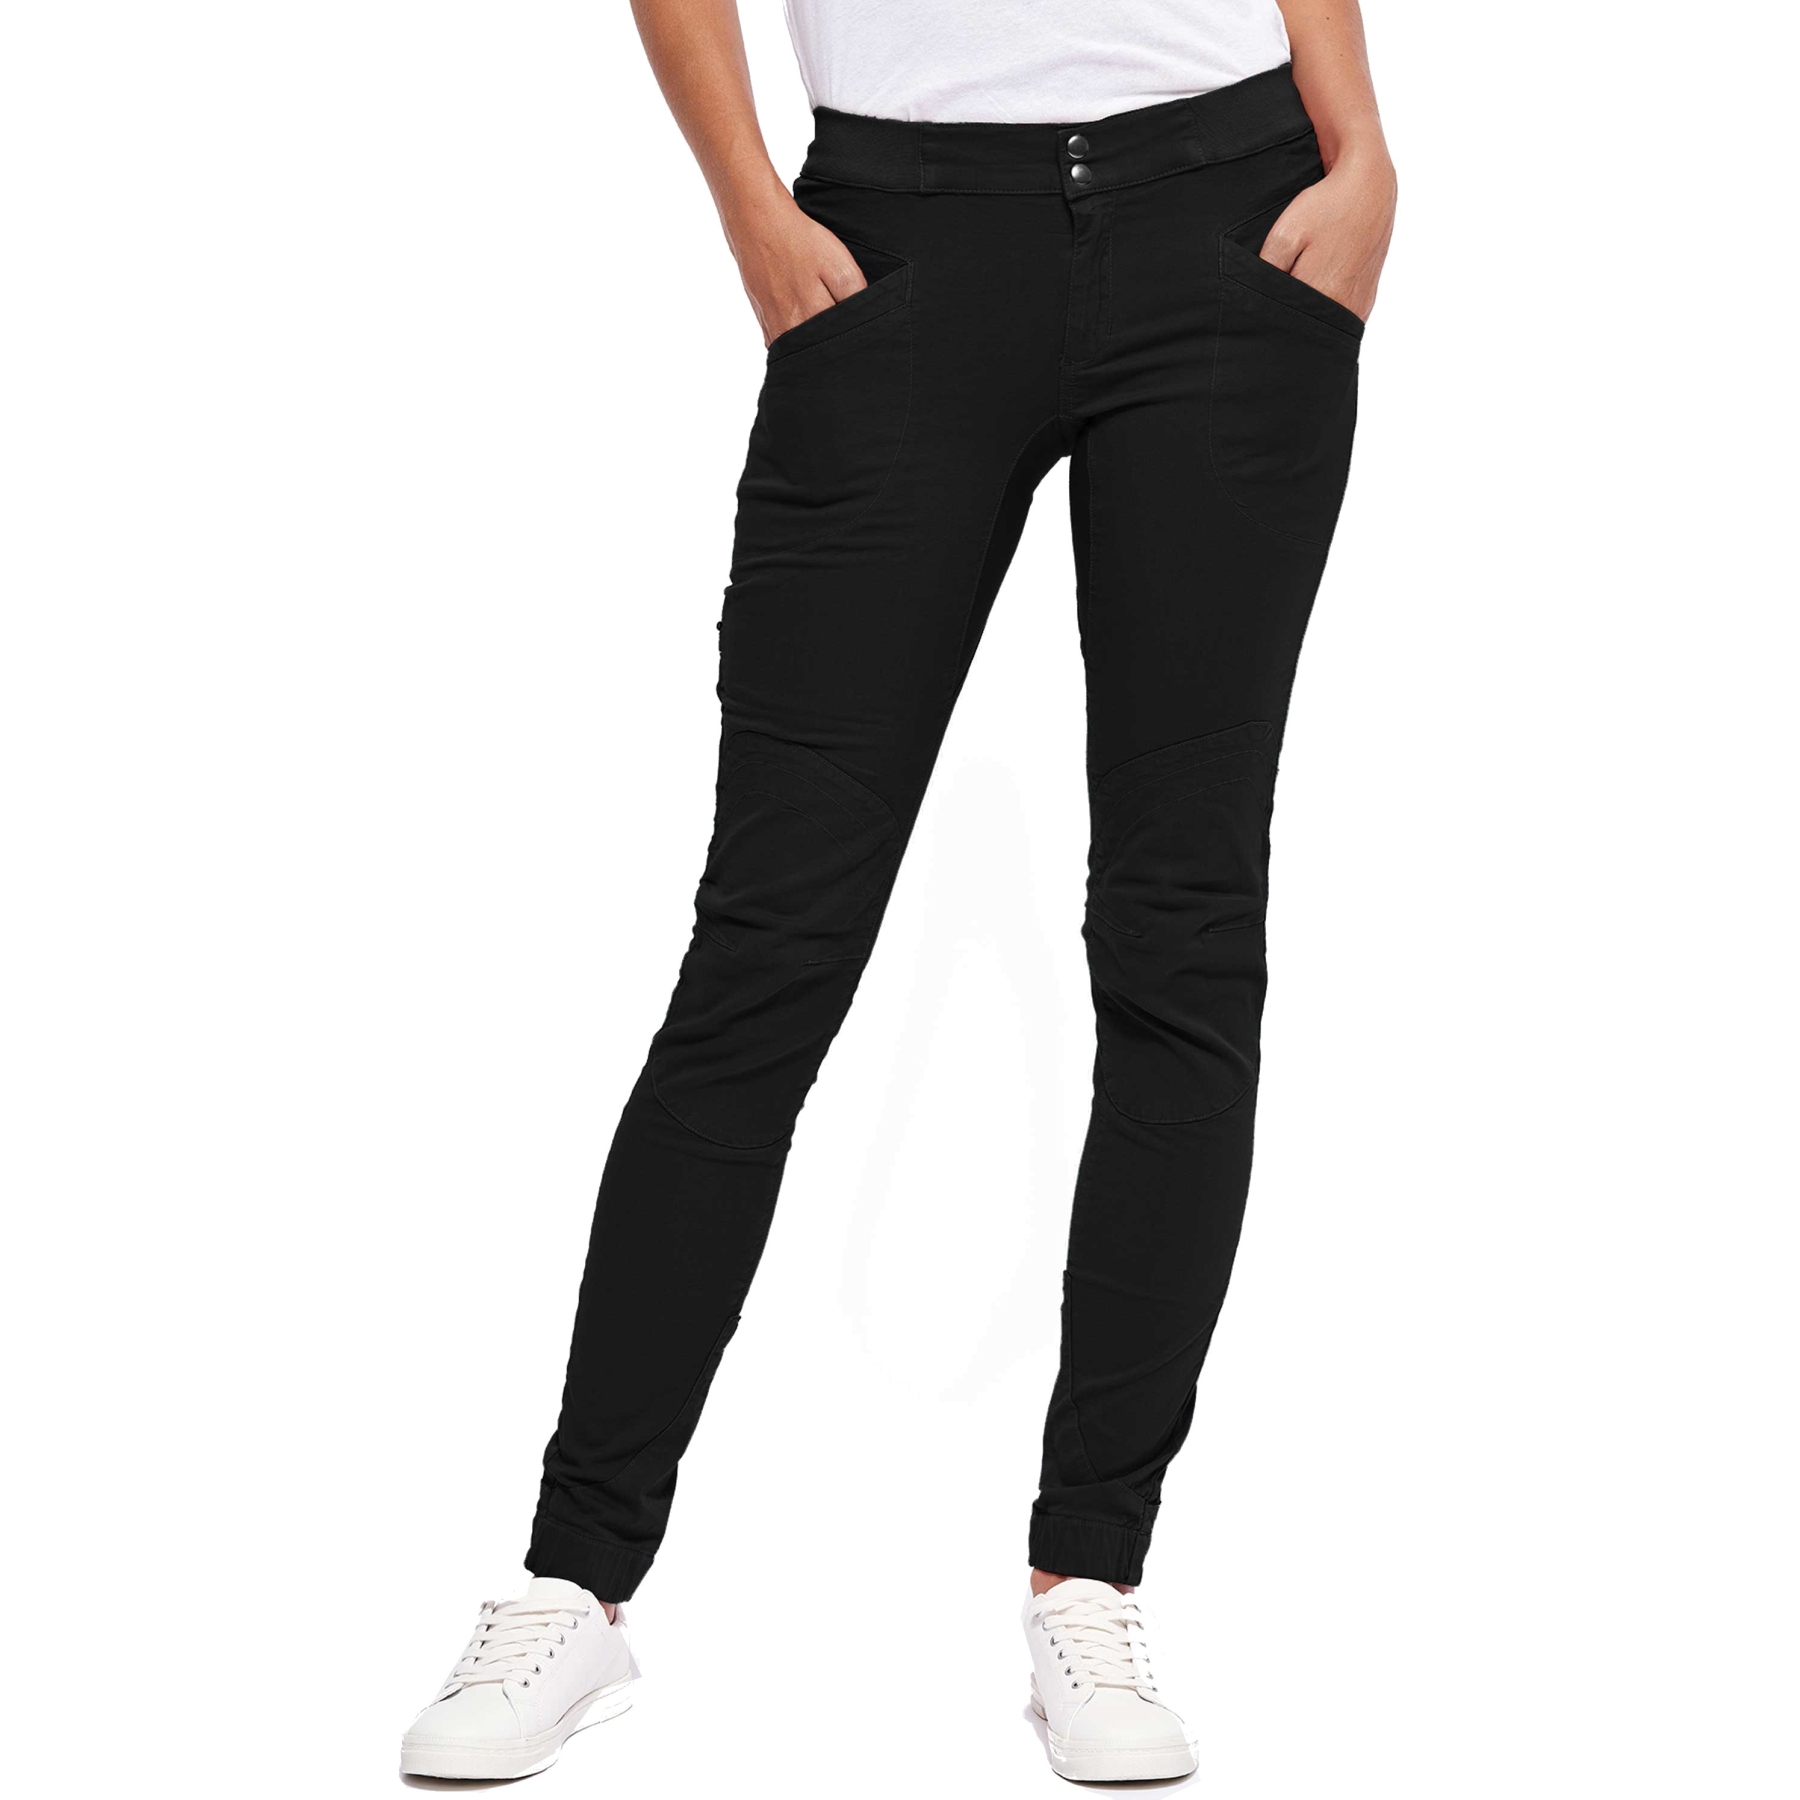 Image of LOOKING FOR WILD Laila Peak Women's Pants - Pirate Black